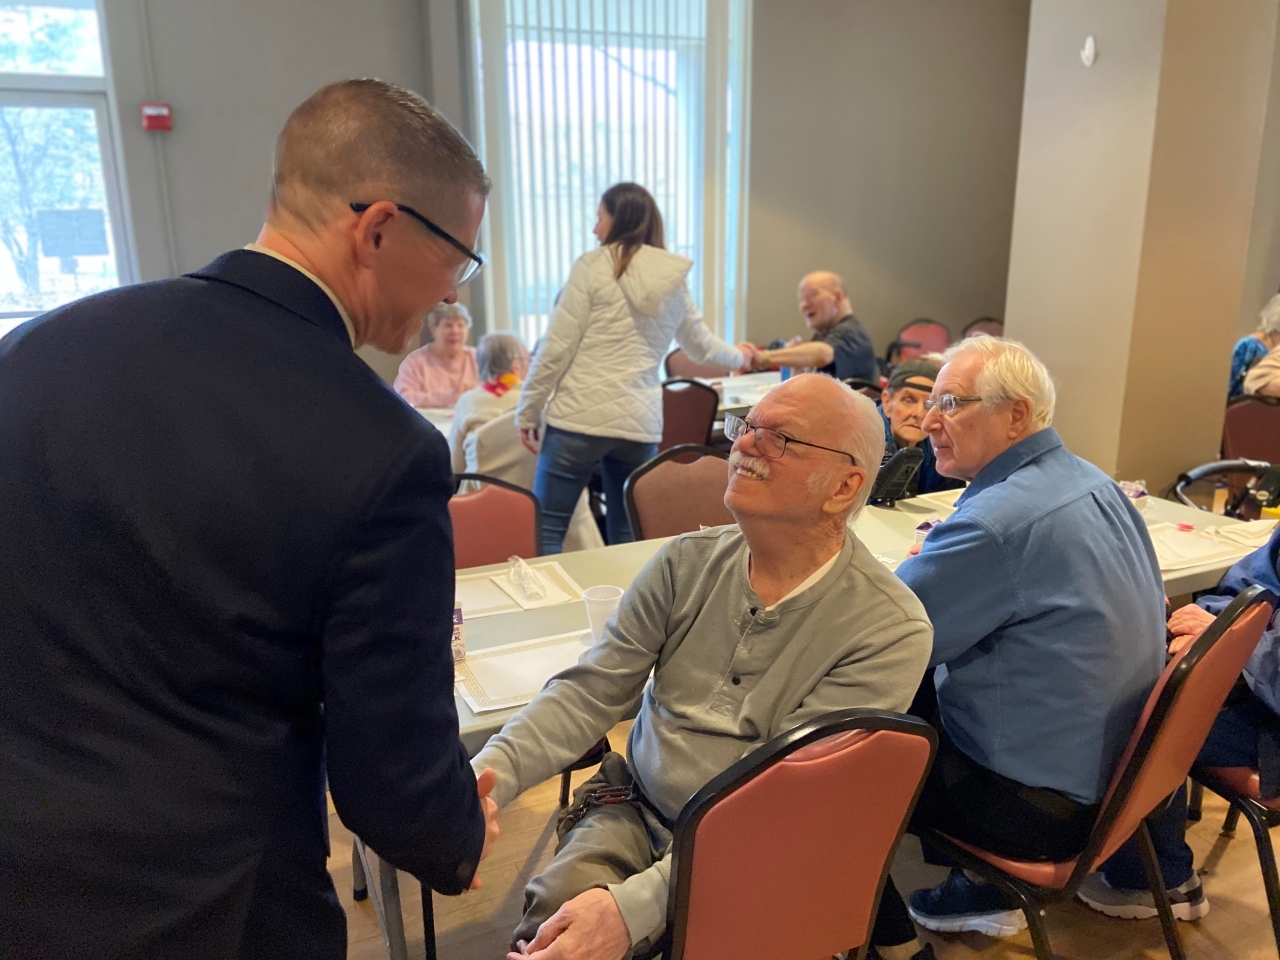 Rep. Brennan meets the kind residents at Parma Heights Senior Center